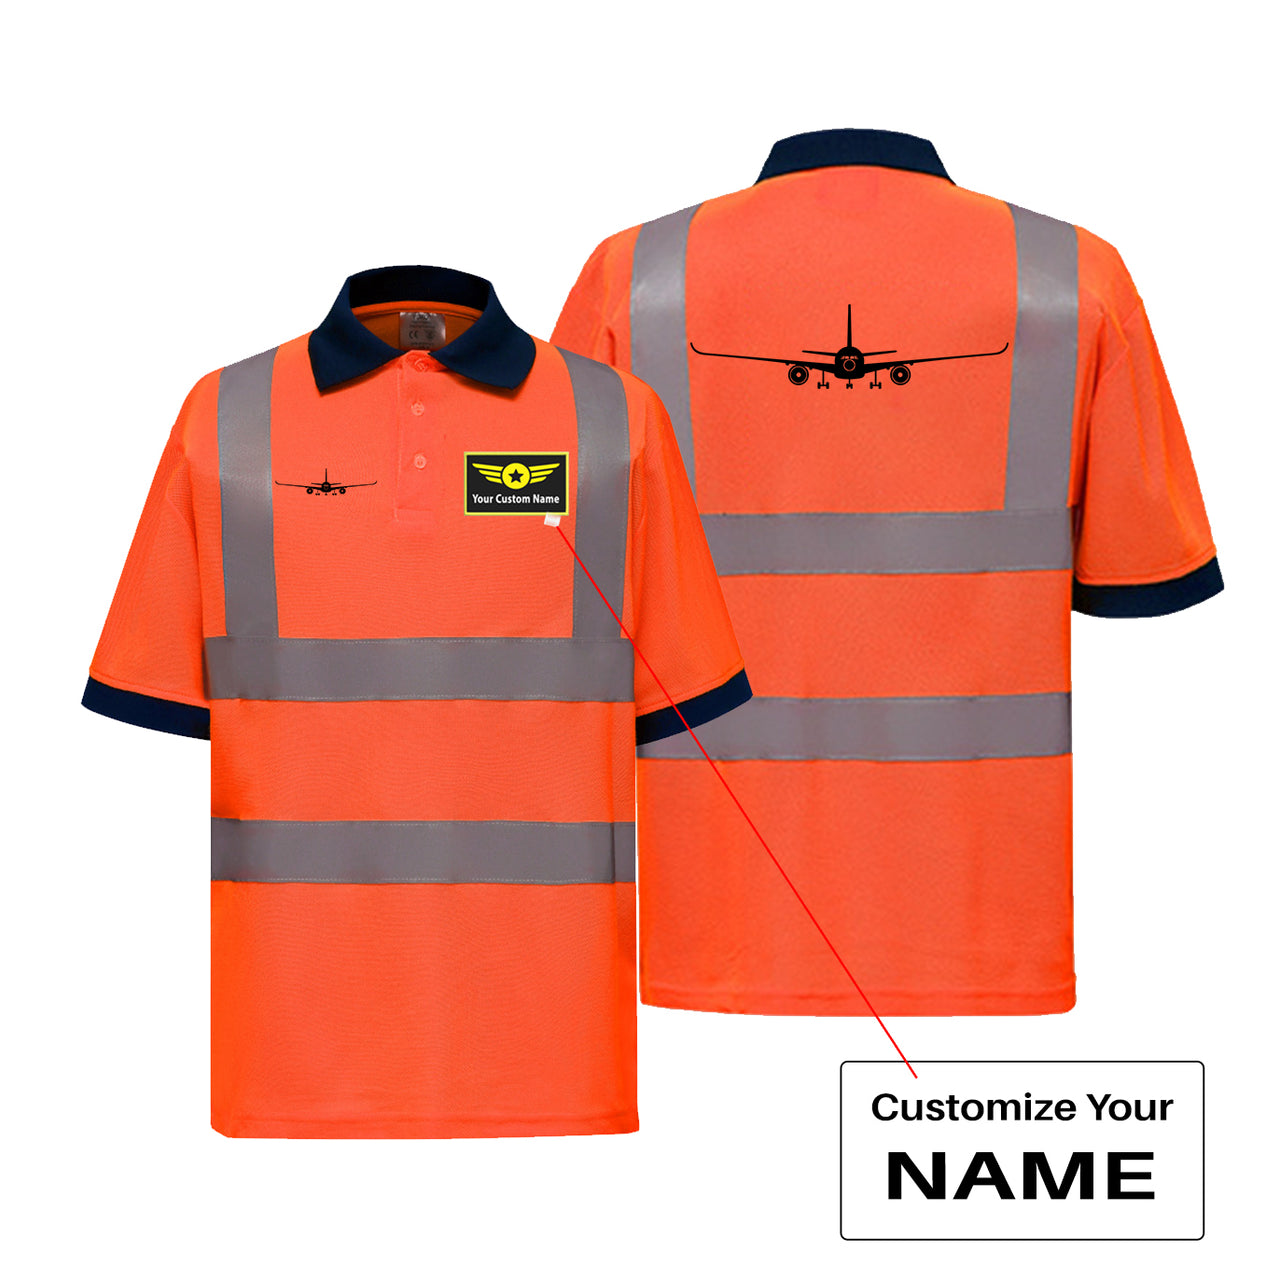 Airbus A350 Silhouette Designed Reflective Polo T-Shirts